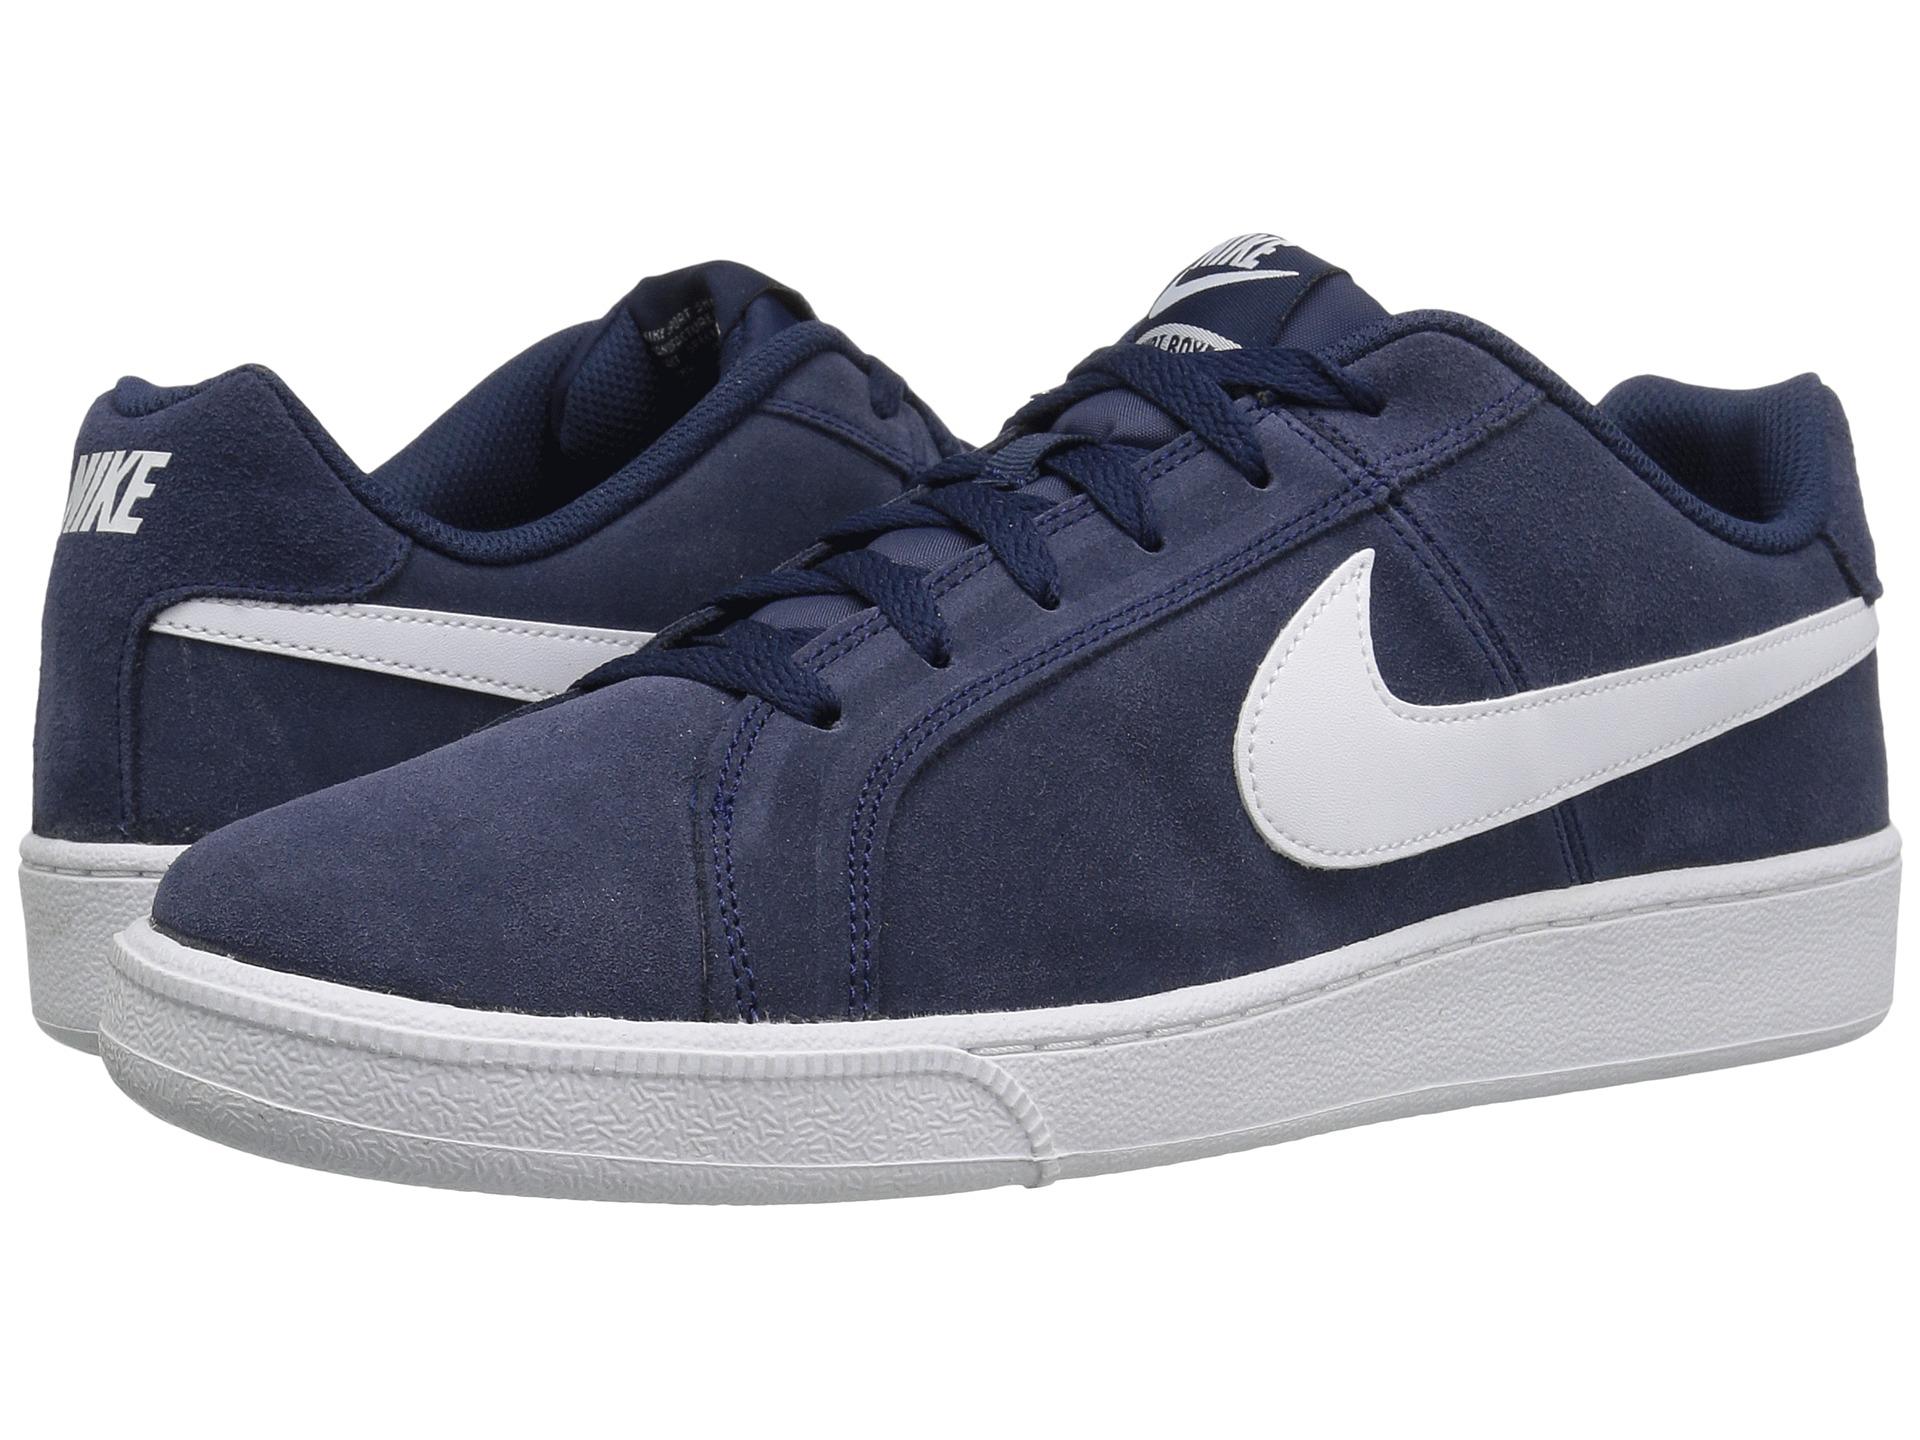 Nike Court Royale Suede in Midnight Navy/White (Blue) for Men - Lyst